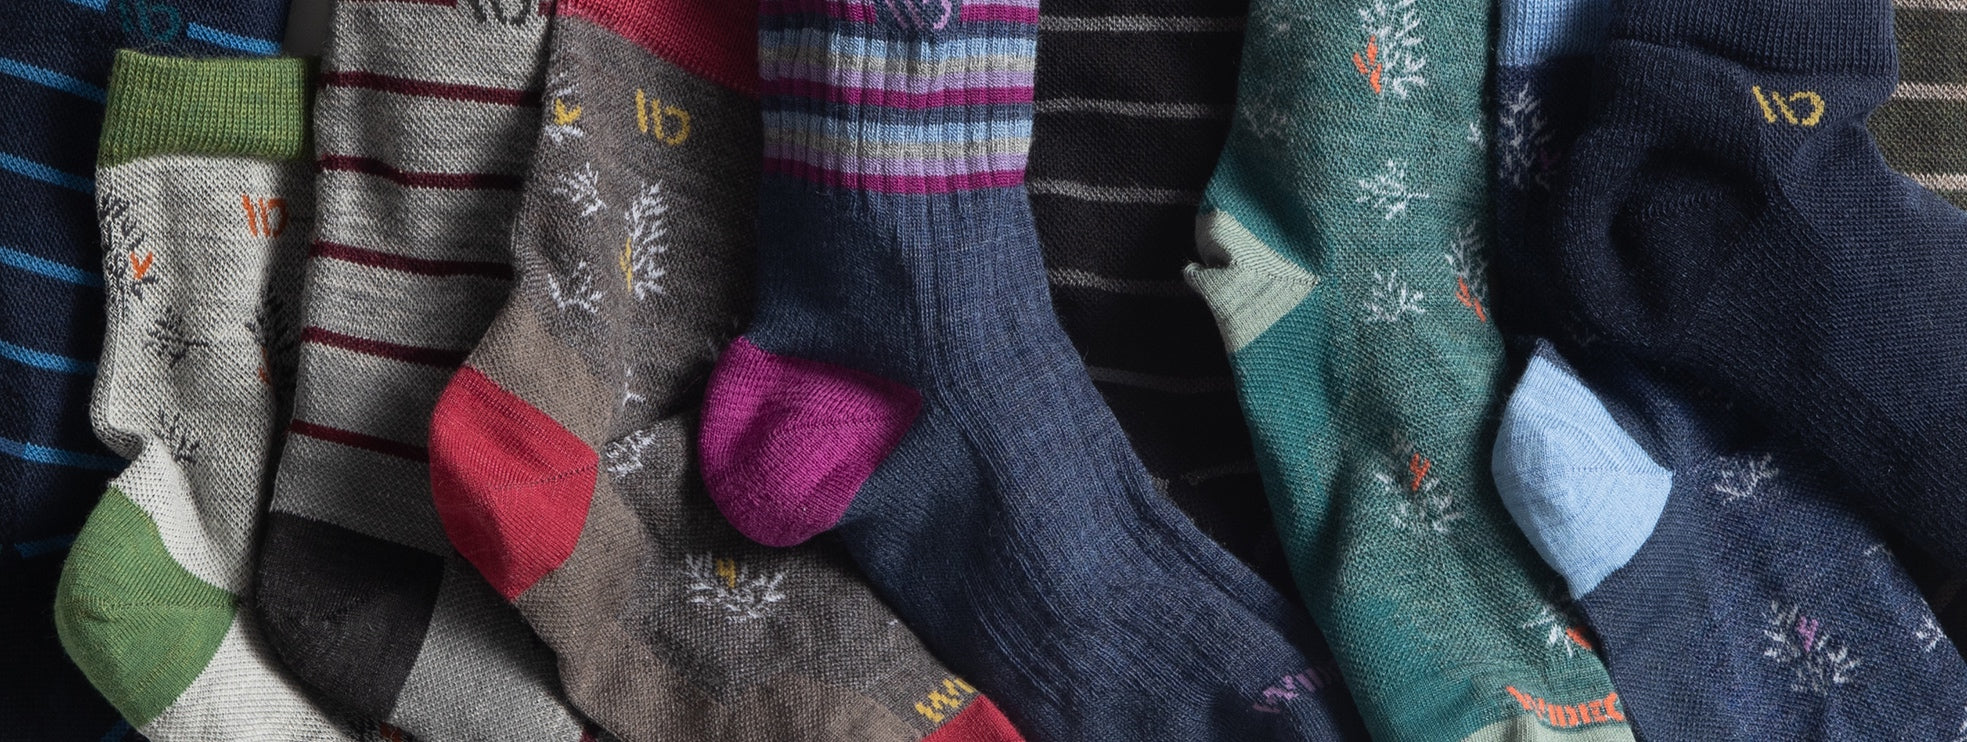 A line up of Wide Open socks showing the different colors and patterns